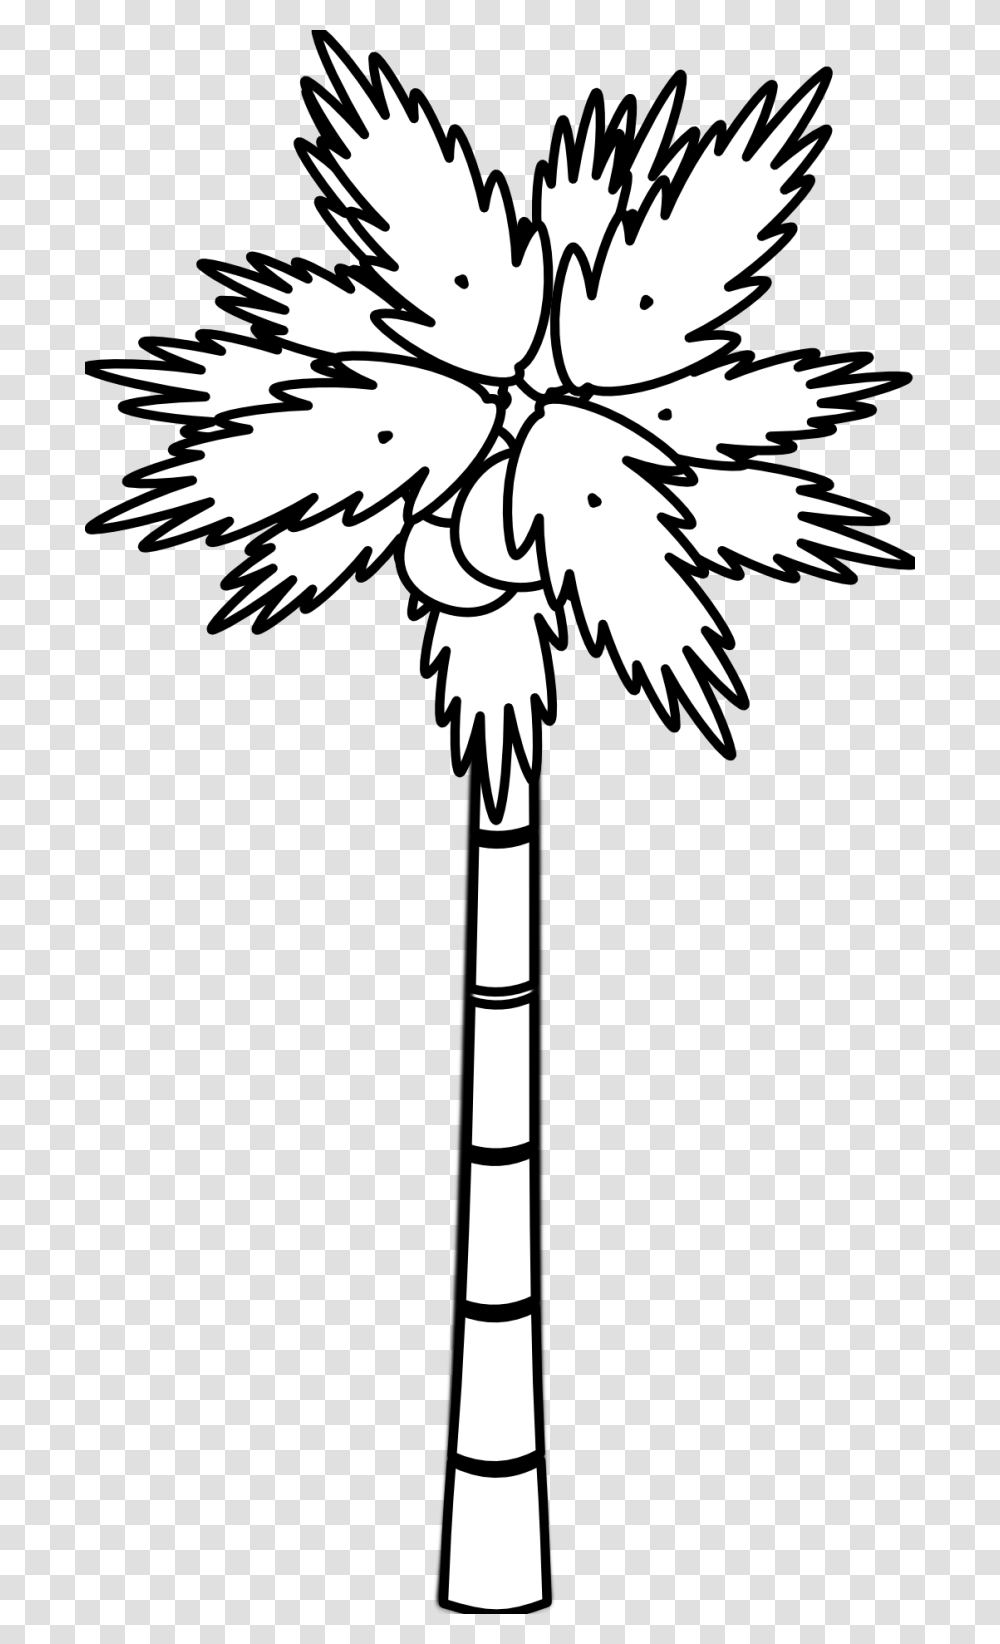 Palm Tree Clipart Black And White Free Clipart Black Amp White Tree, Emblem, Weapon, Weaponry Transparent Png